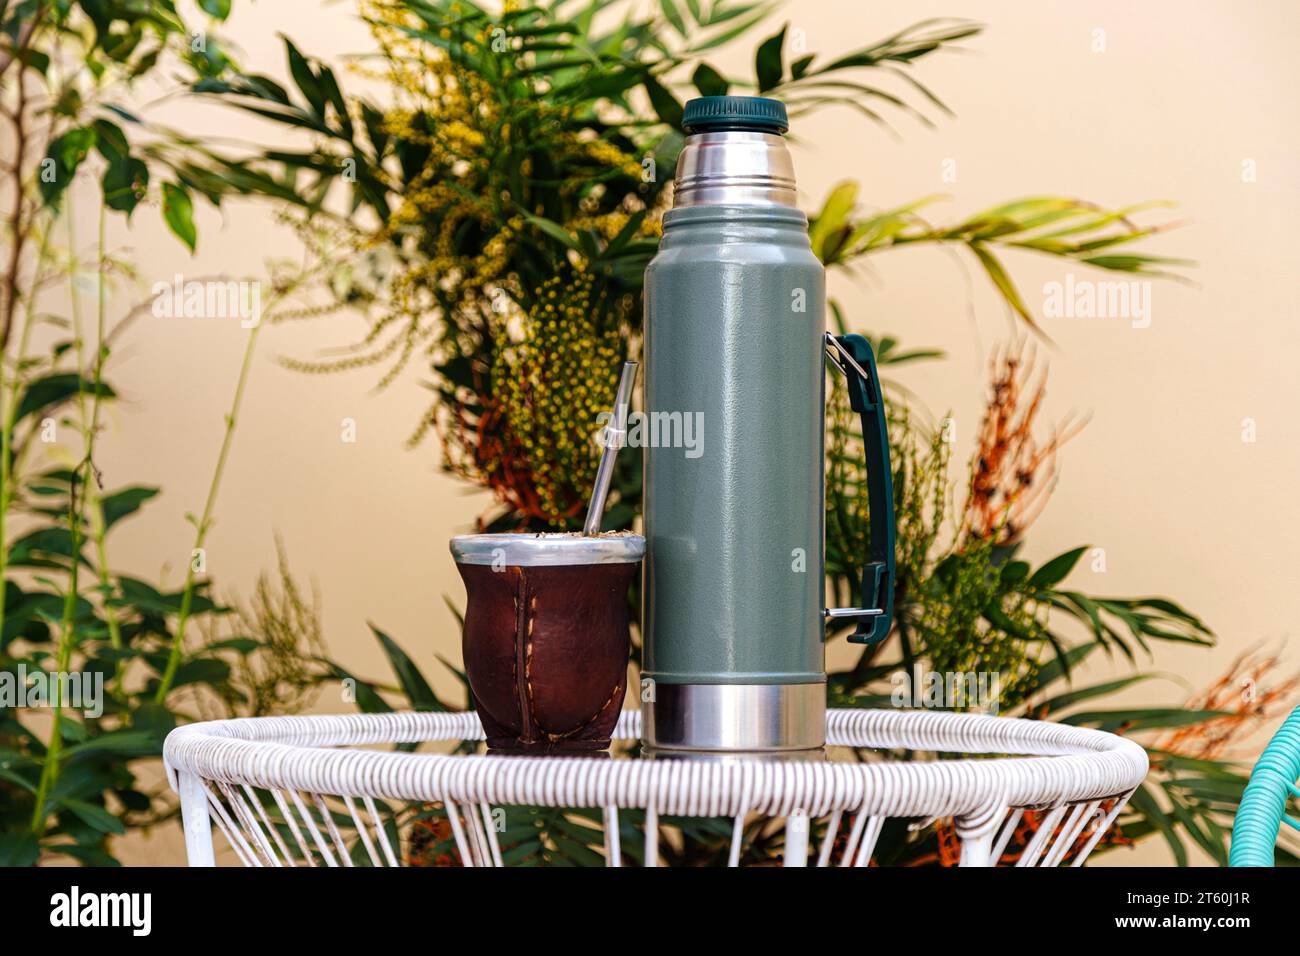 https://c8.alamy.com/comp/2T60J1R/thermos-and-calabash-mate-cup-with-straw-yerba-mate-tea-infusion-traditional-south-american-hot-drink-2T60J1R.jpg